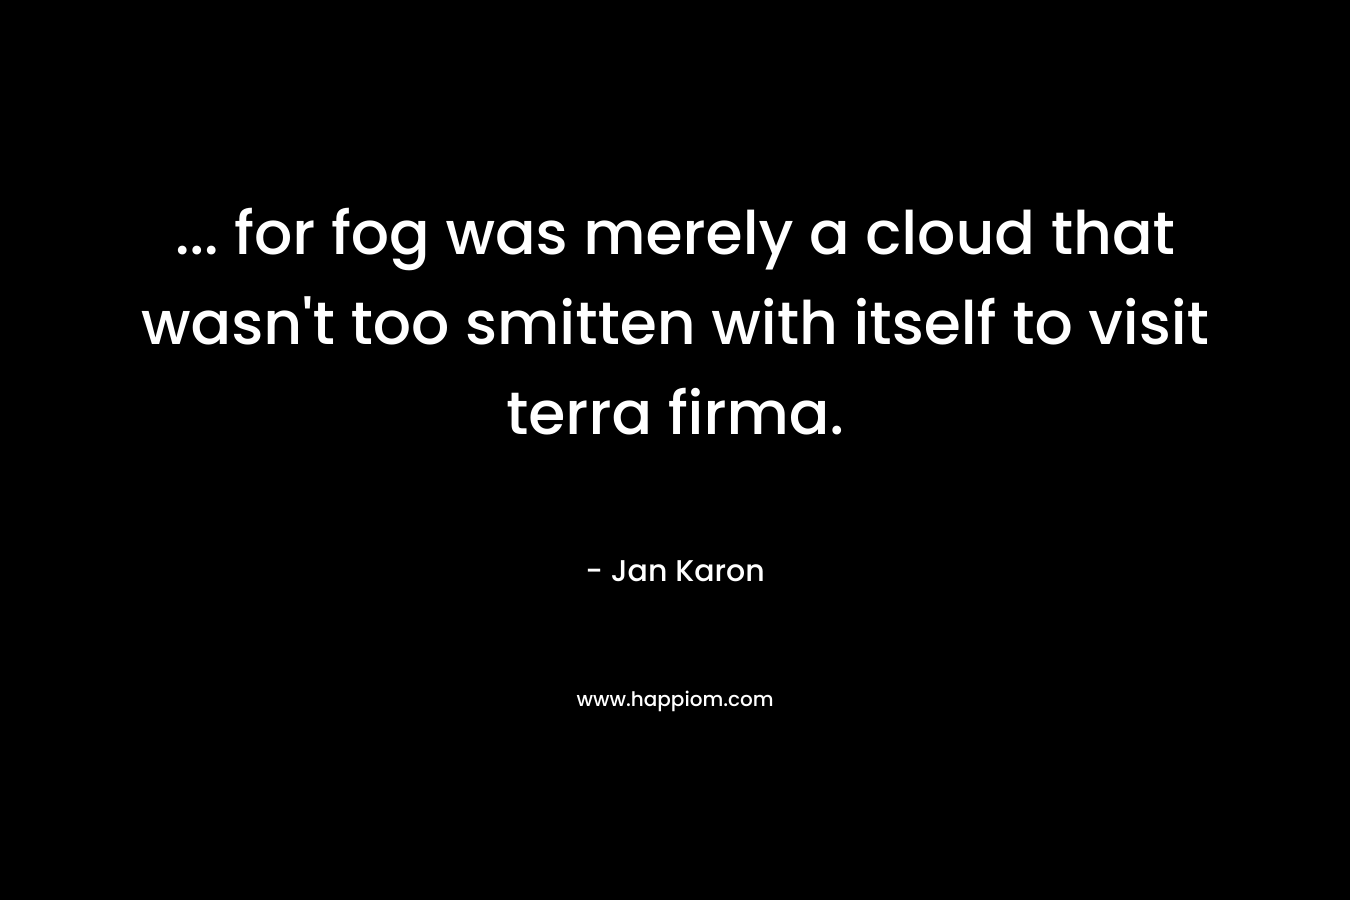 … for fog was merely a cloud that wasn’t too smitten with itself to visit terra firma. – Jan Karon